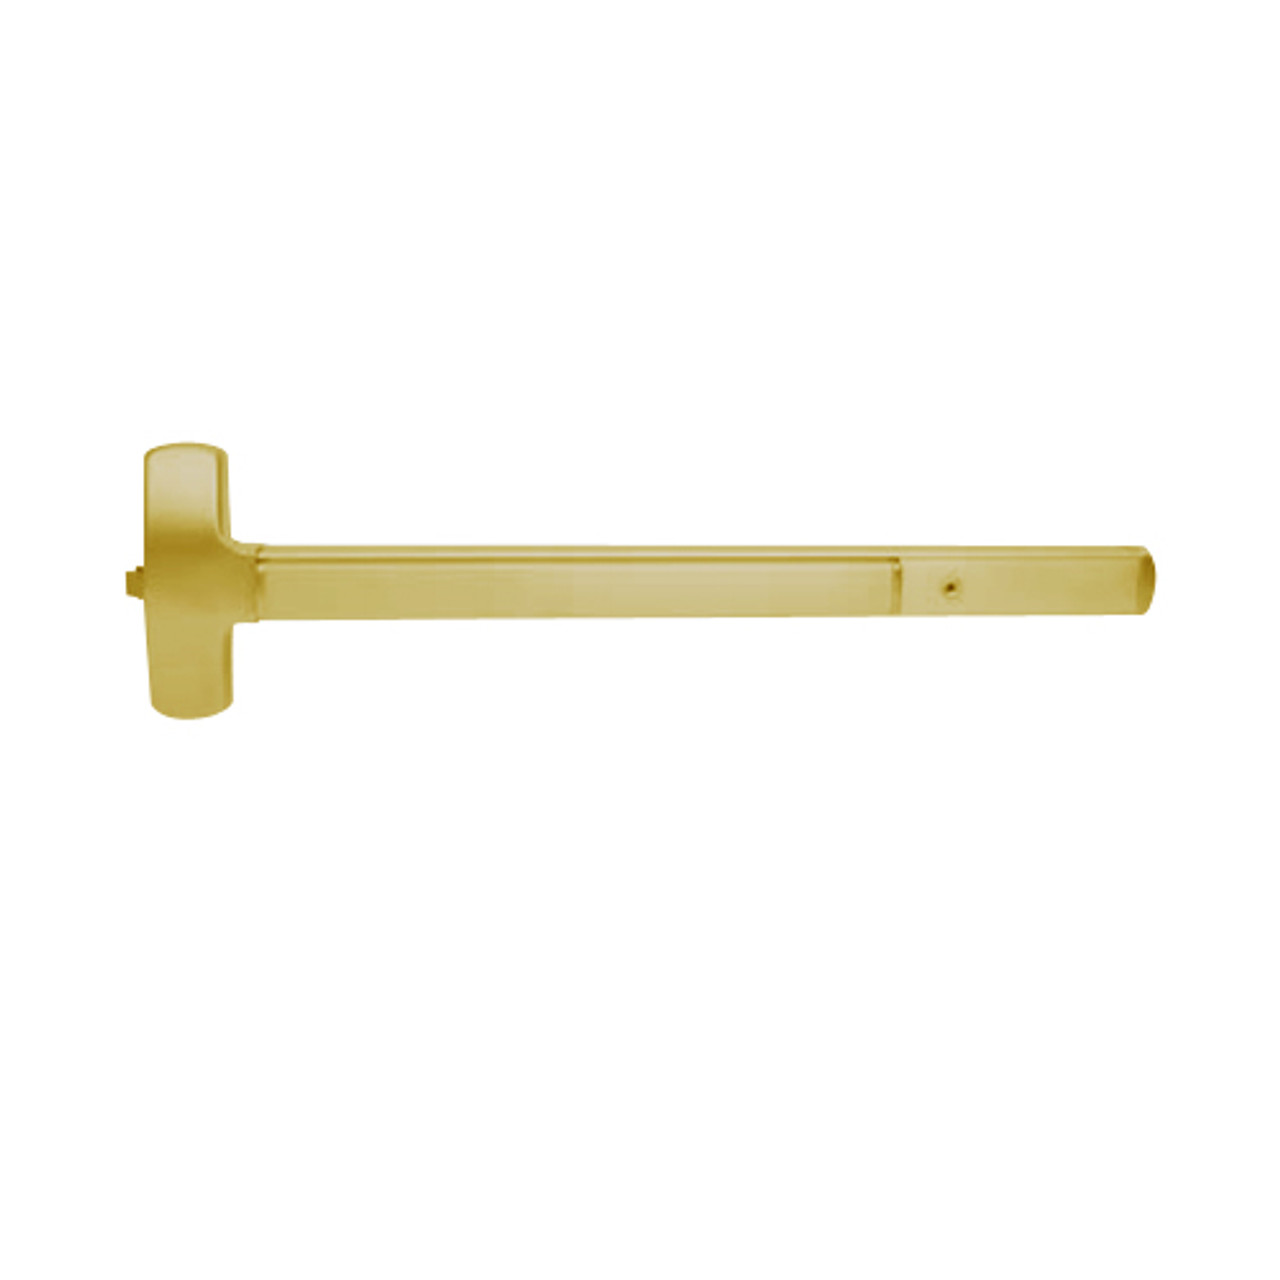 25-R-NL-OP-US3-3 Falcon Exit Device in Polished Brass